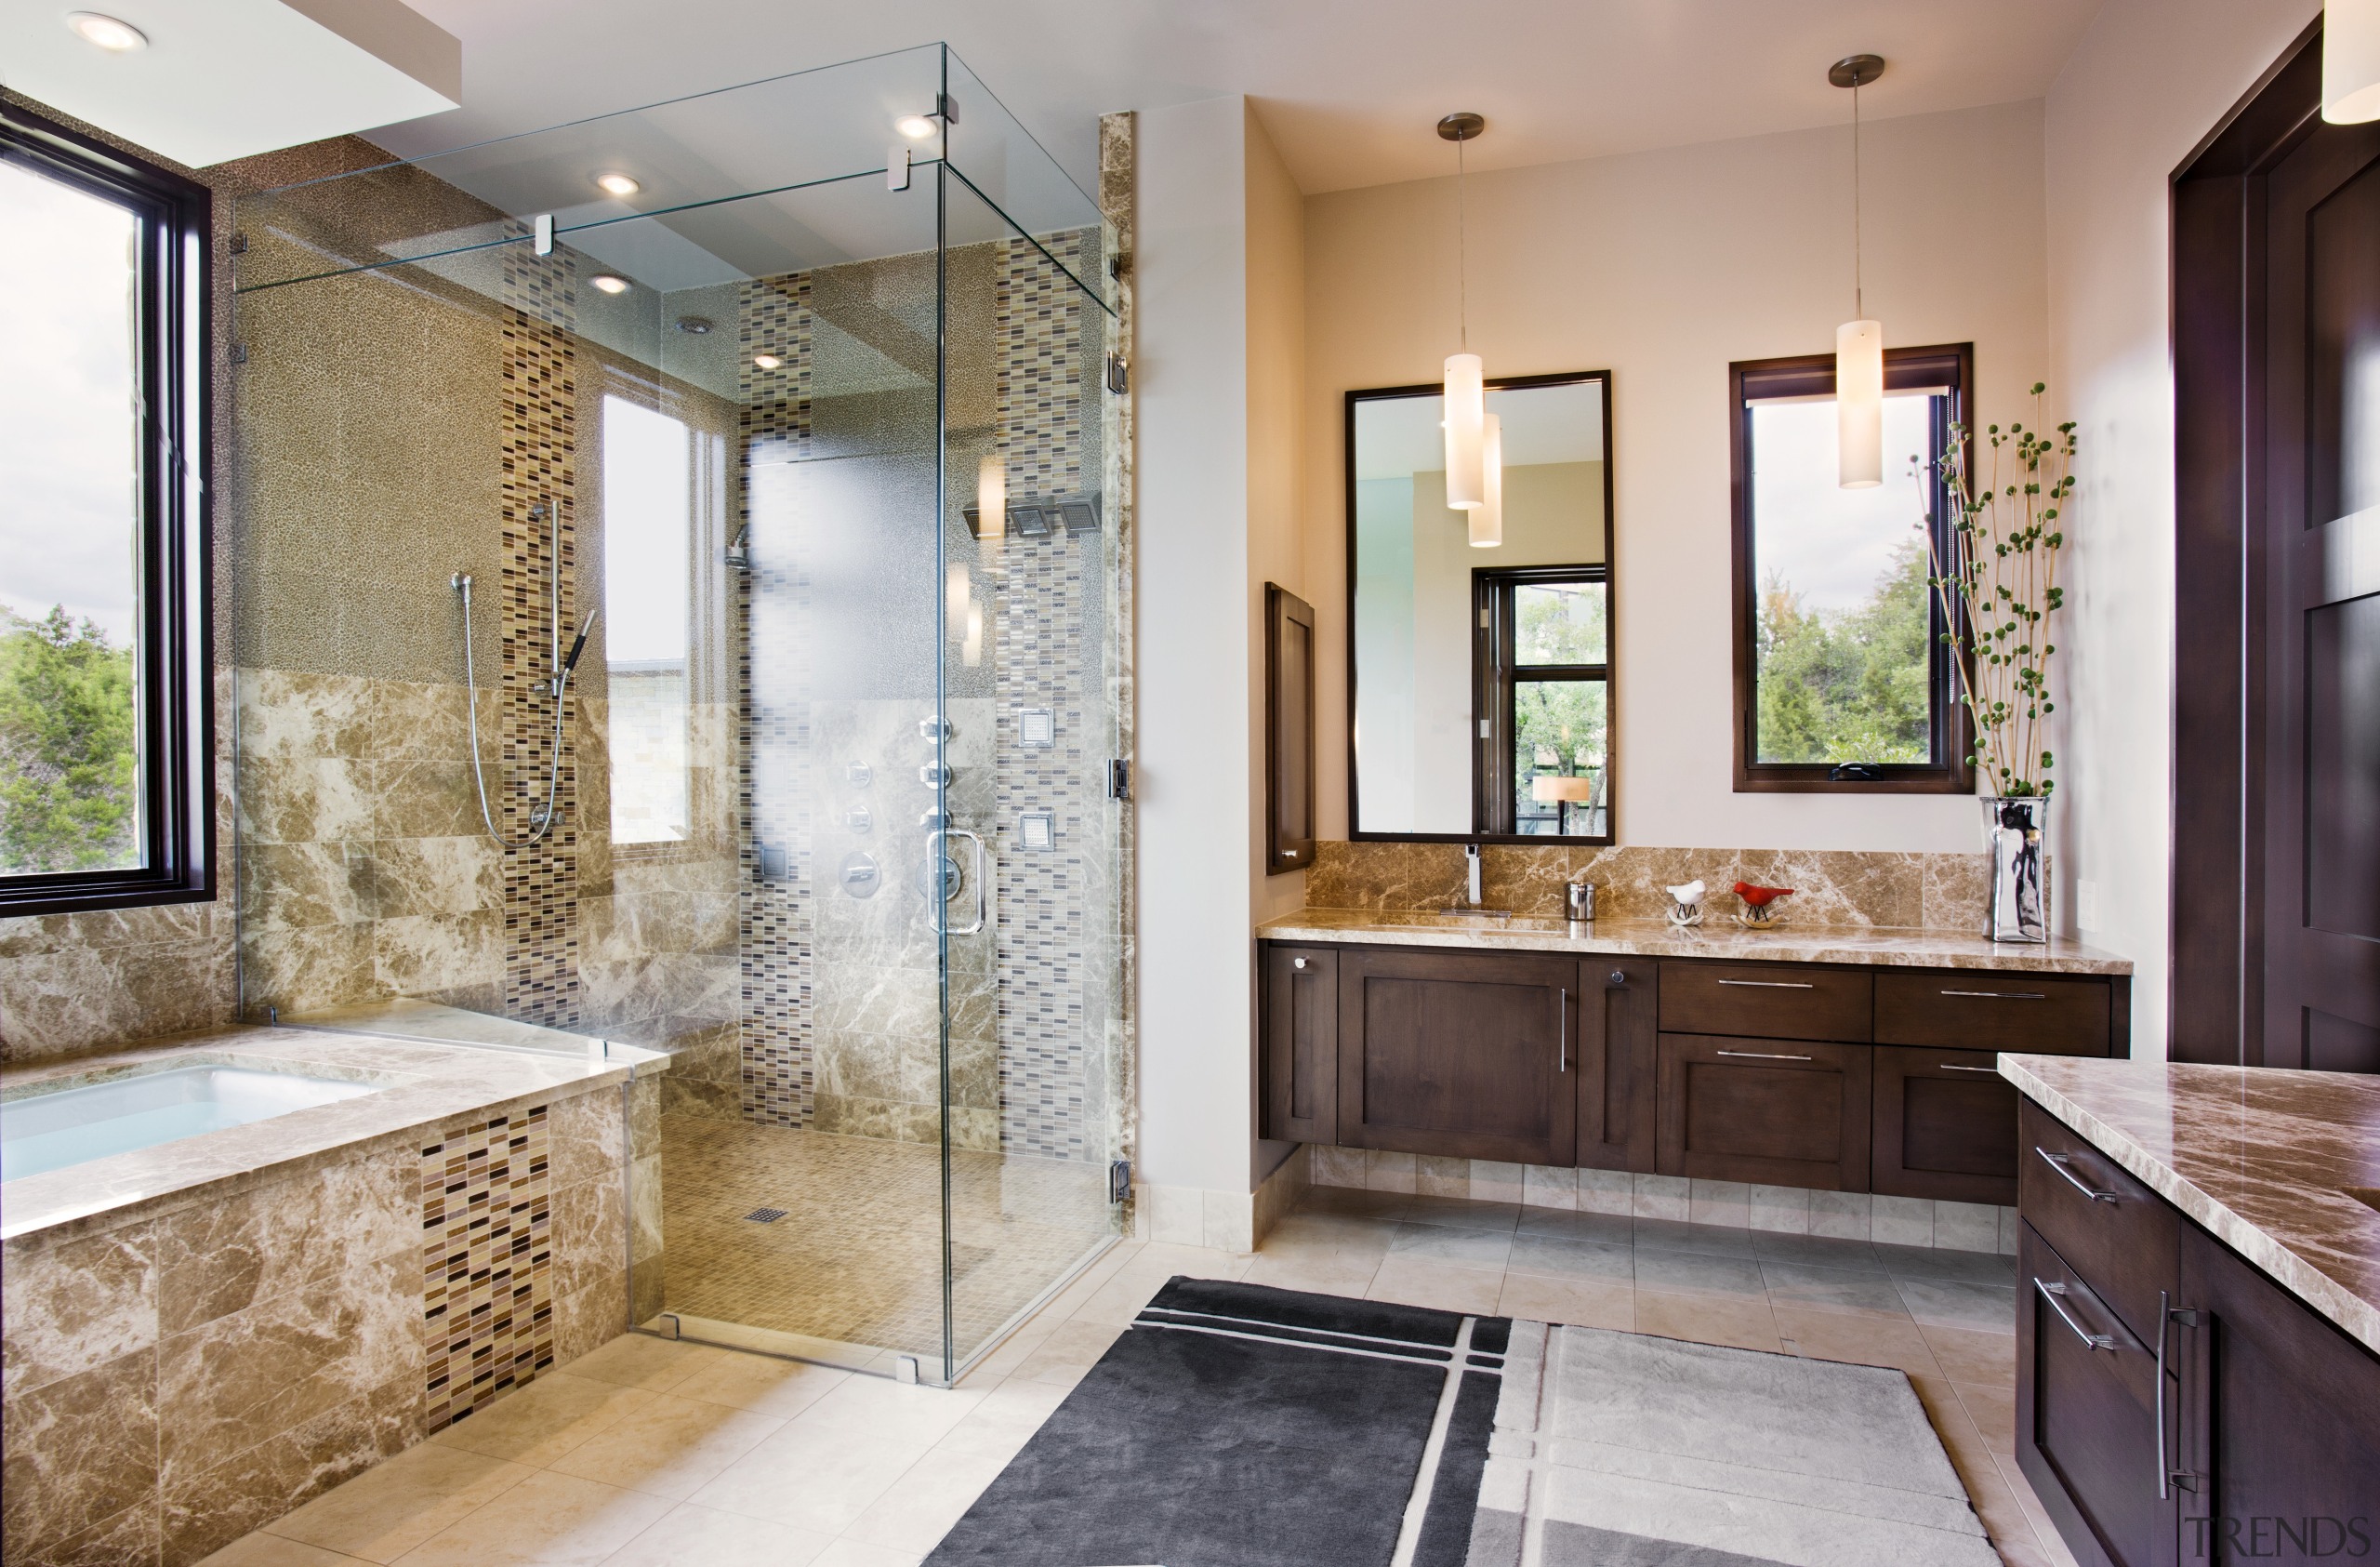 Decorative tiling creates the wow factor in the bathroom, estate, home, interior design, real estate, room, window, gray